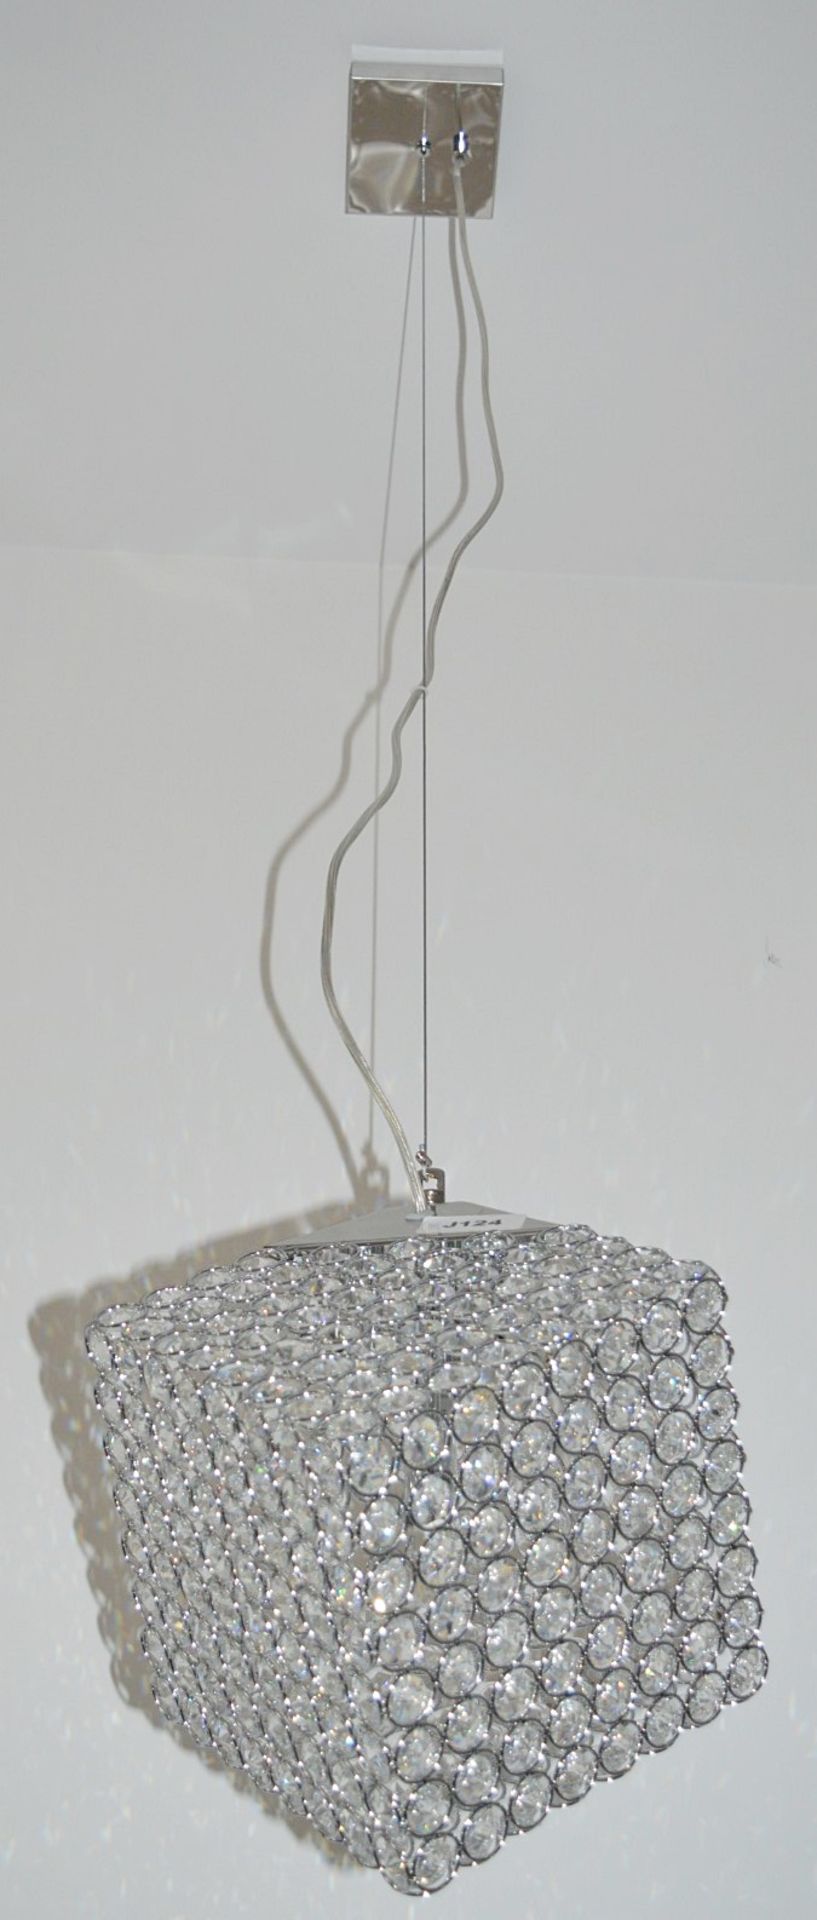 1 x Pendant 4-Light Ceiling Light With Clear Crystal Button Inserts - Chrome Finish - RRP £237.60 - Image 4 of 5